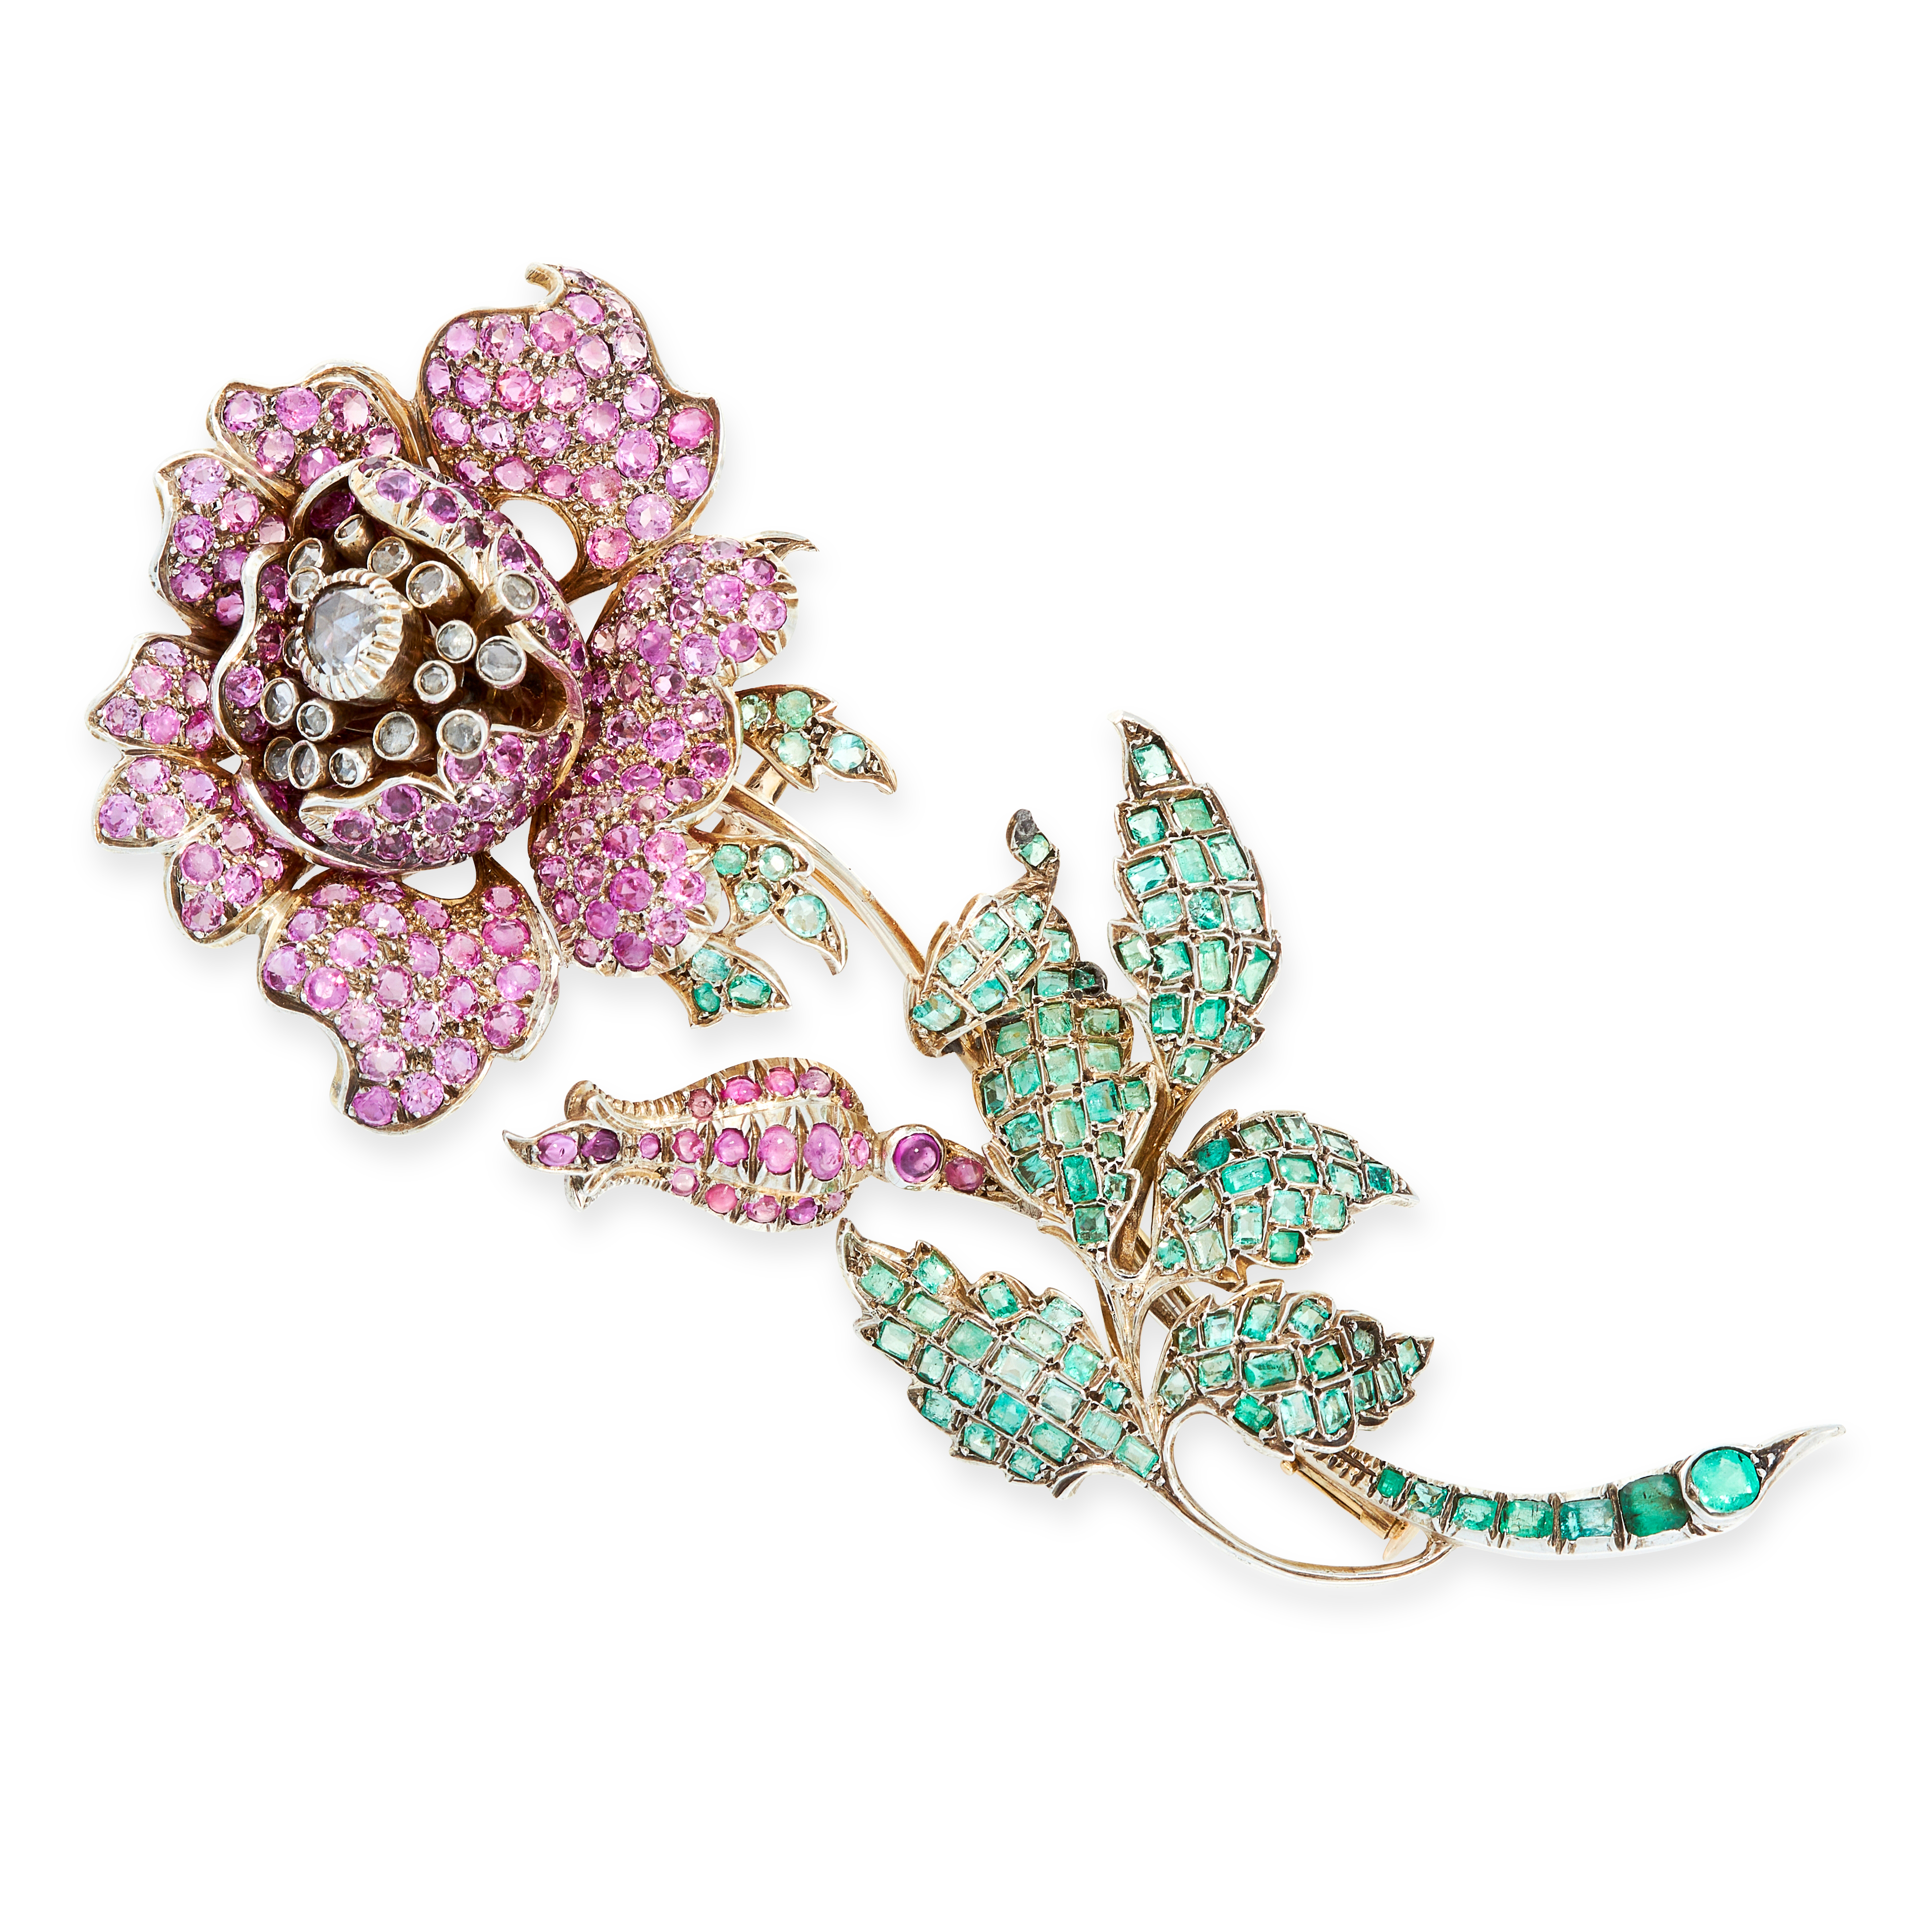 A PINK SAPPHIRE, EMERALD AND DIAMOND BROOCH designed as a flower, the petals jewelled with